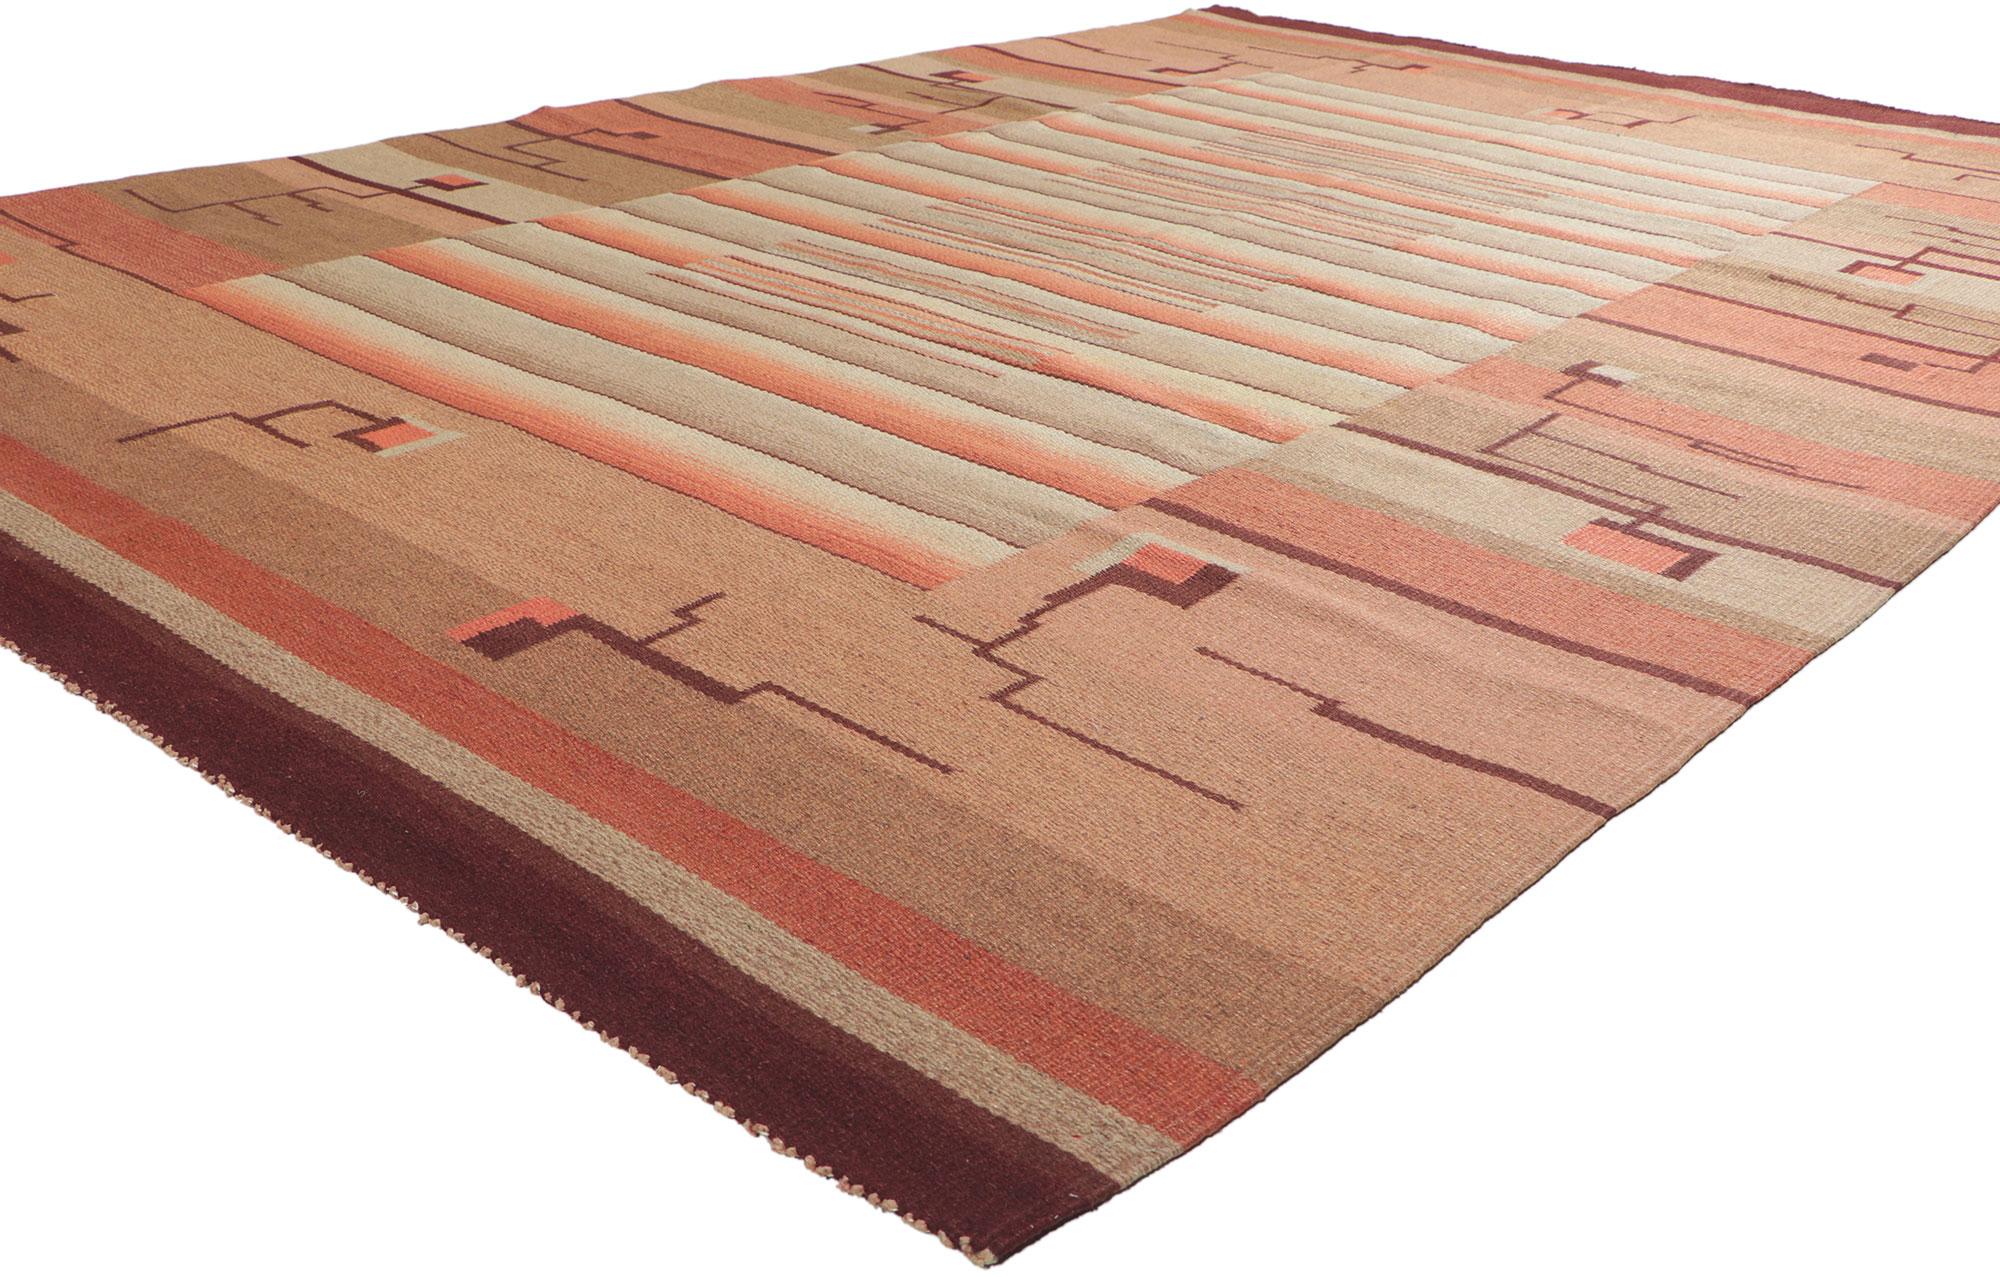 78466 Laila Karttunen Finnish Flatweave Rug, 06'06 x 09'08.
Bauhaus simplicity meets stylized Art Deco in this vintage Finnish flatweave rug. The eye-catching geometric design and earthy colorway woven into this piece work together creating a truly